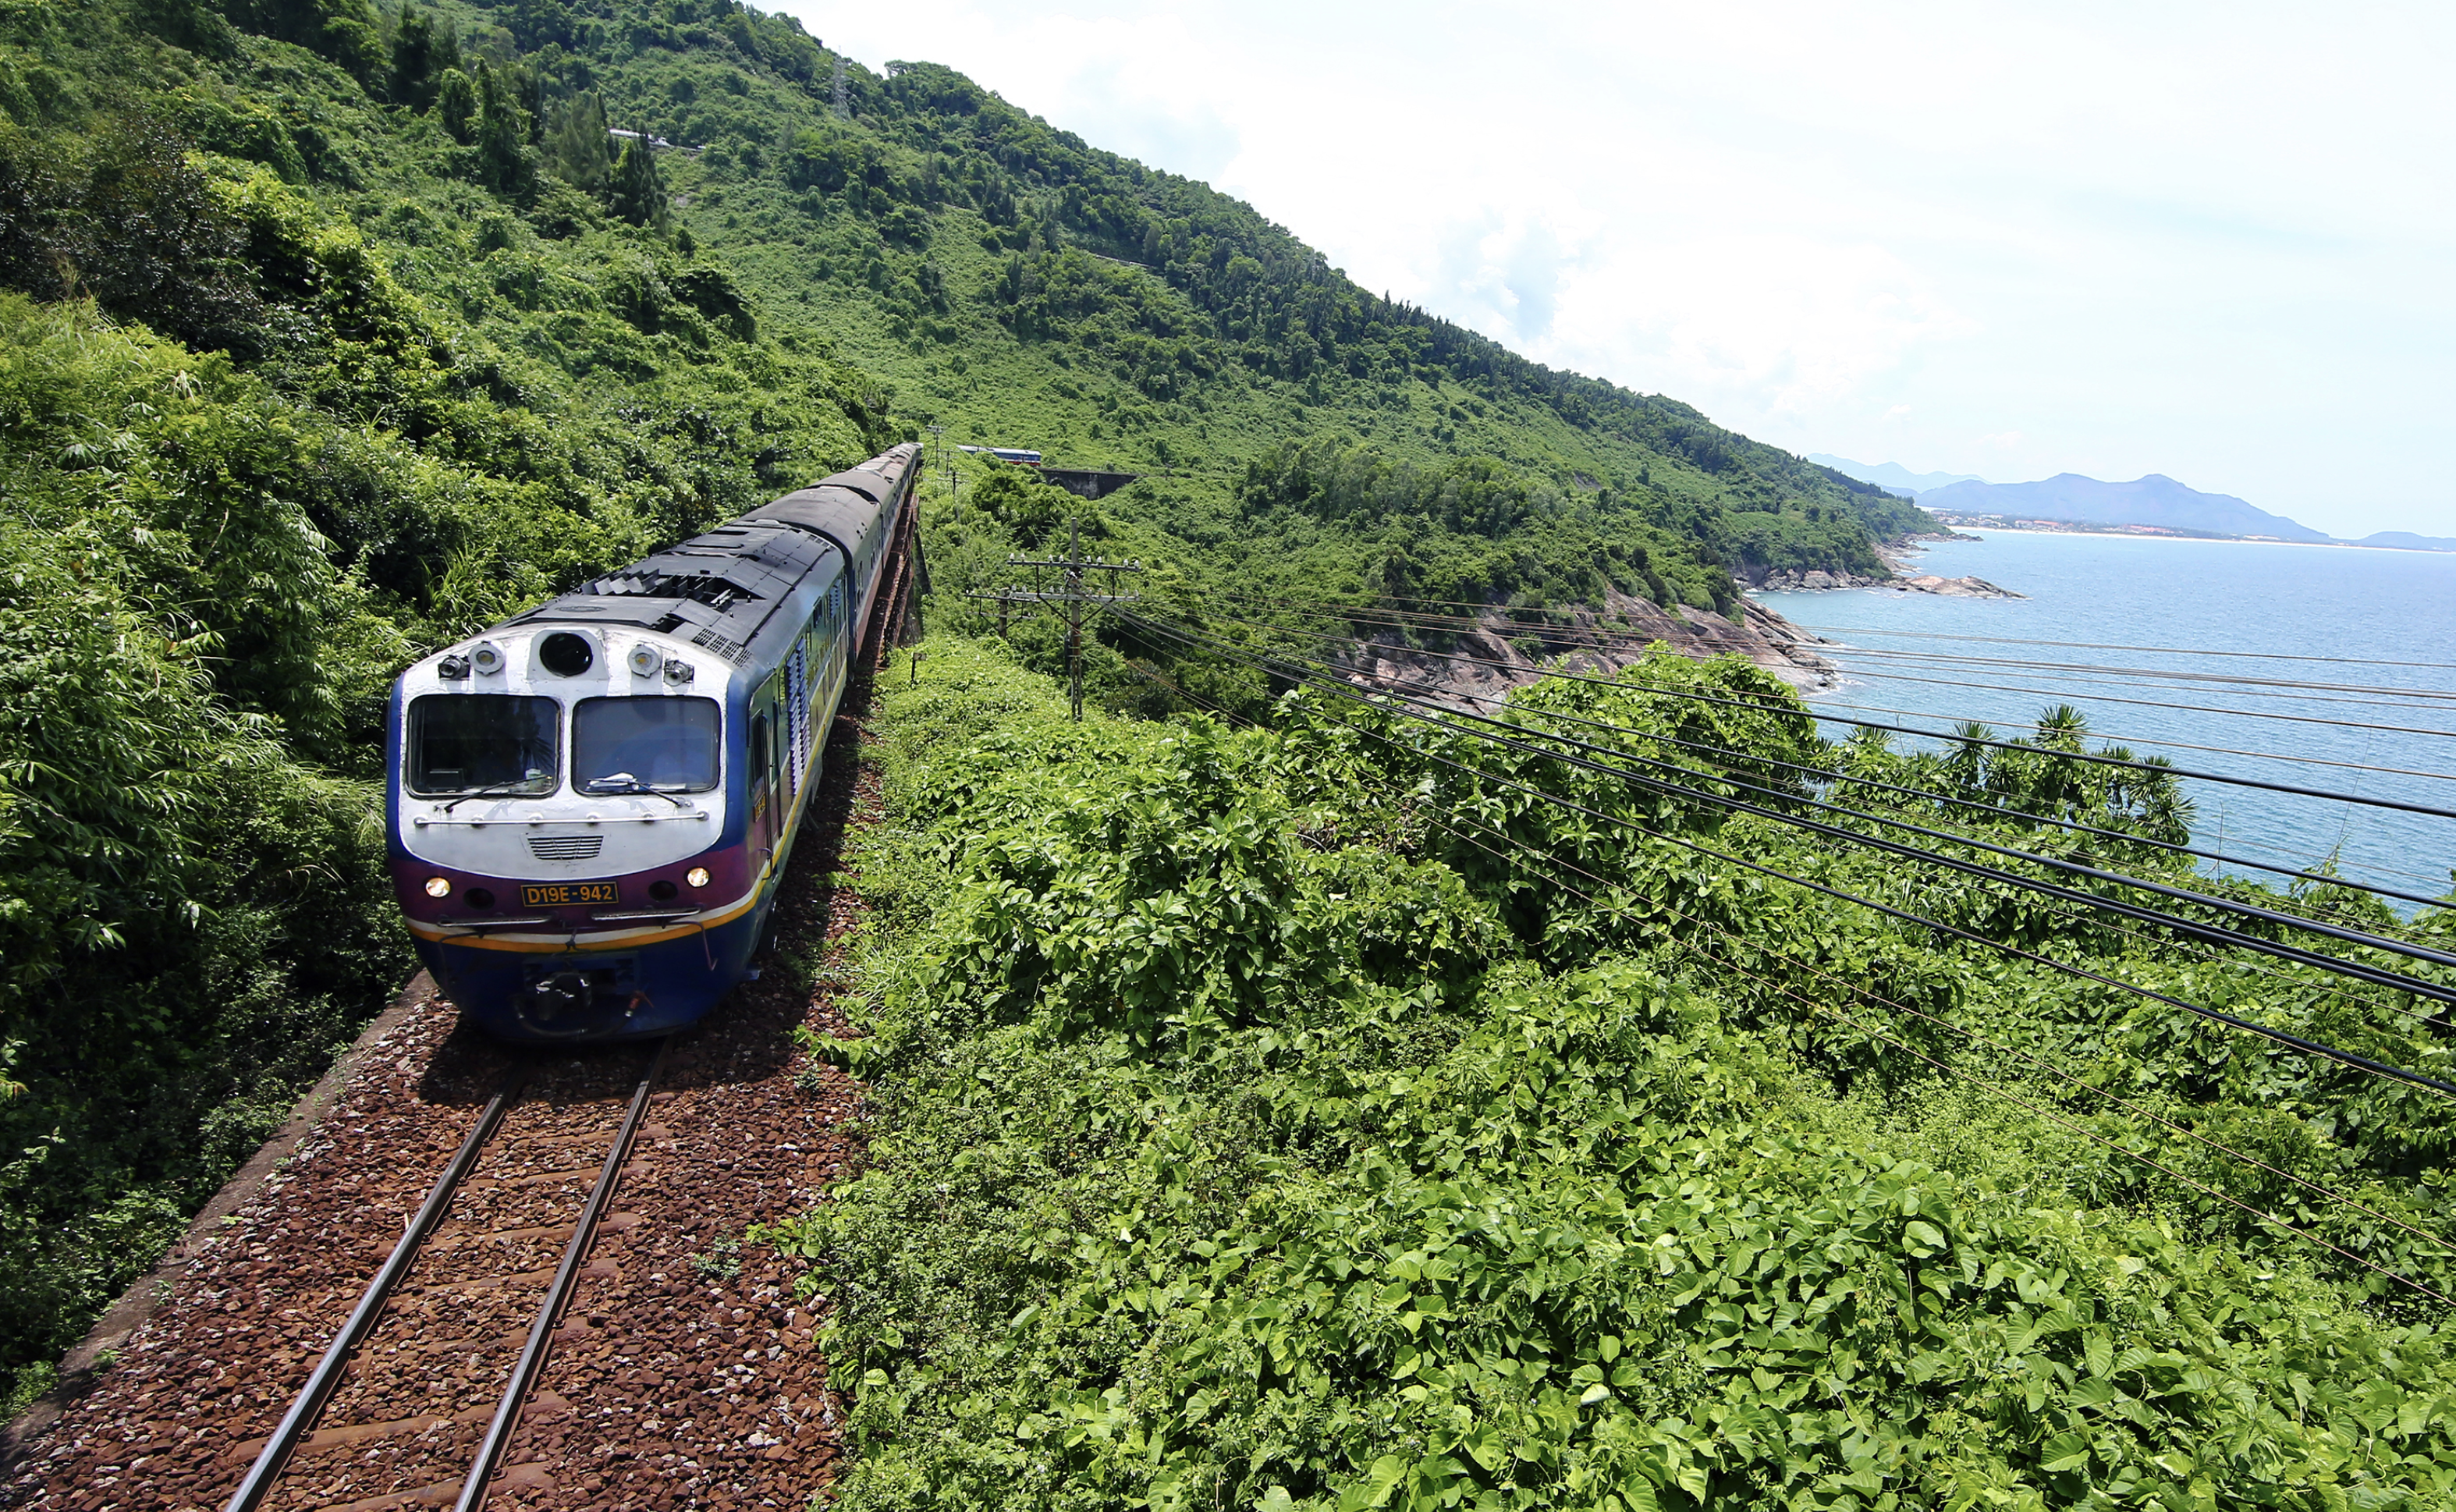 Vietnam’s transport ministry proposes 350km-per-hour cross-country rail line